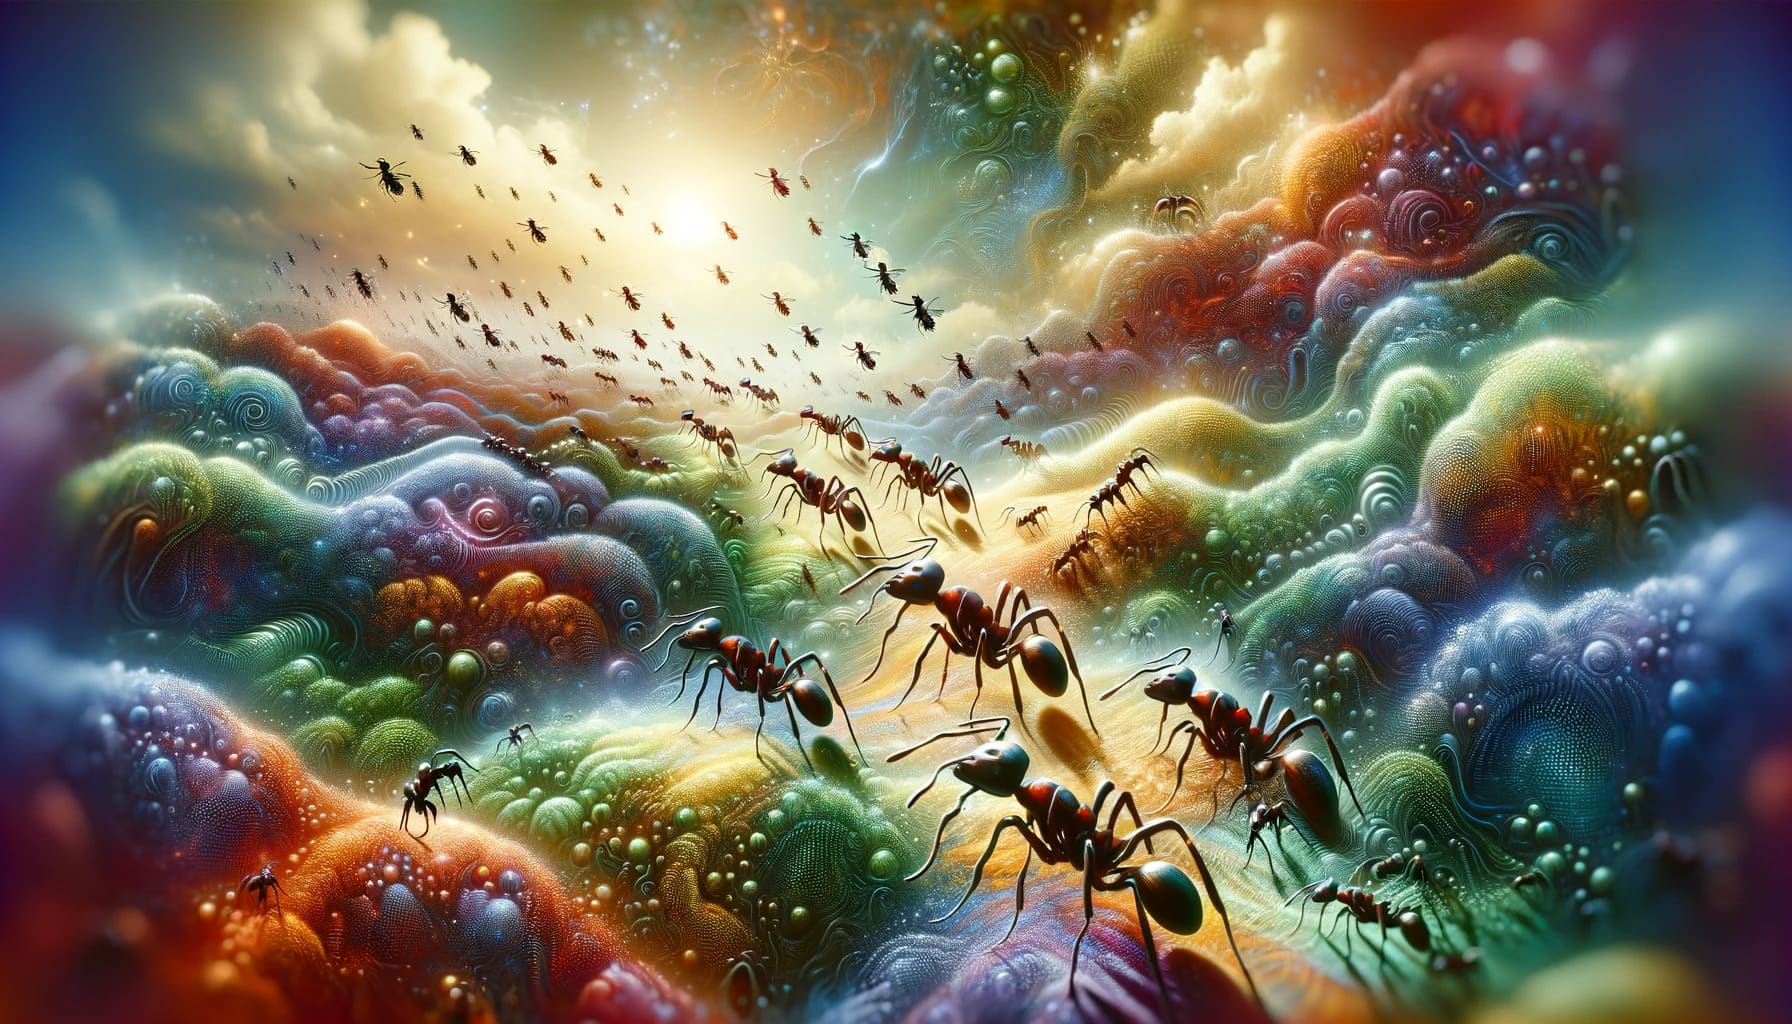 What is the spiritual meaning of dreaming about ants